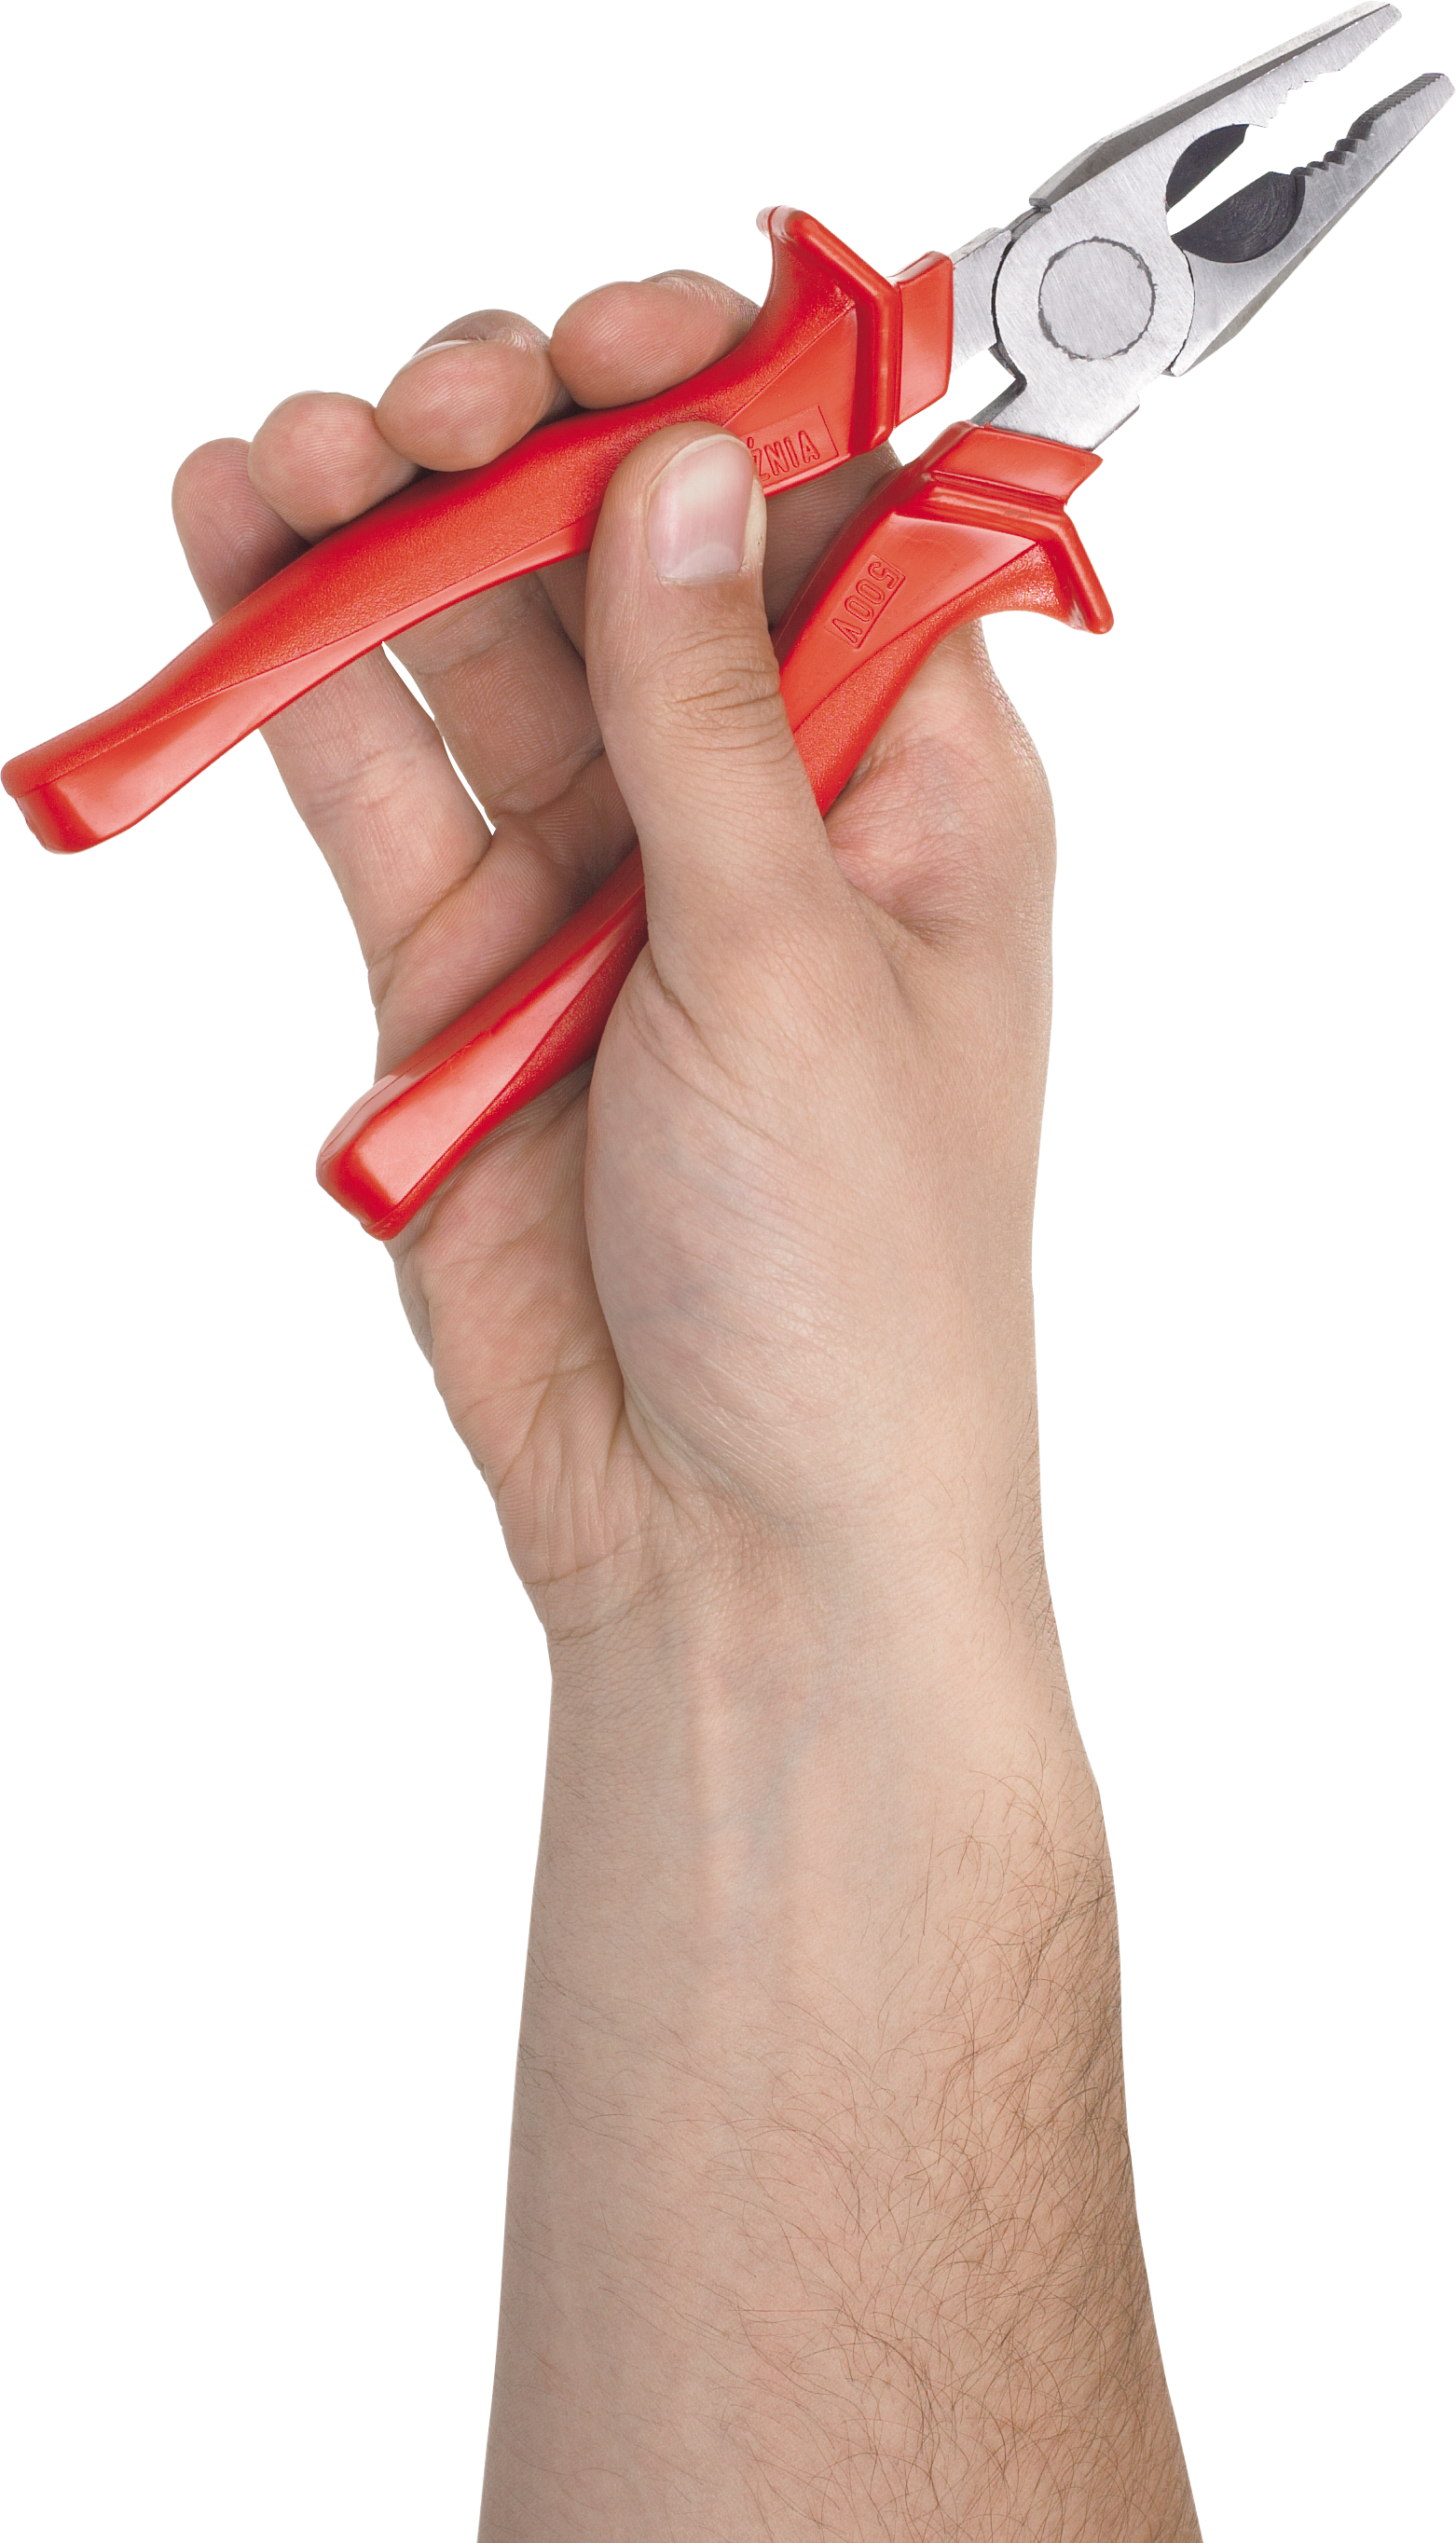 Plier in hand PNG image